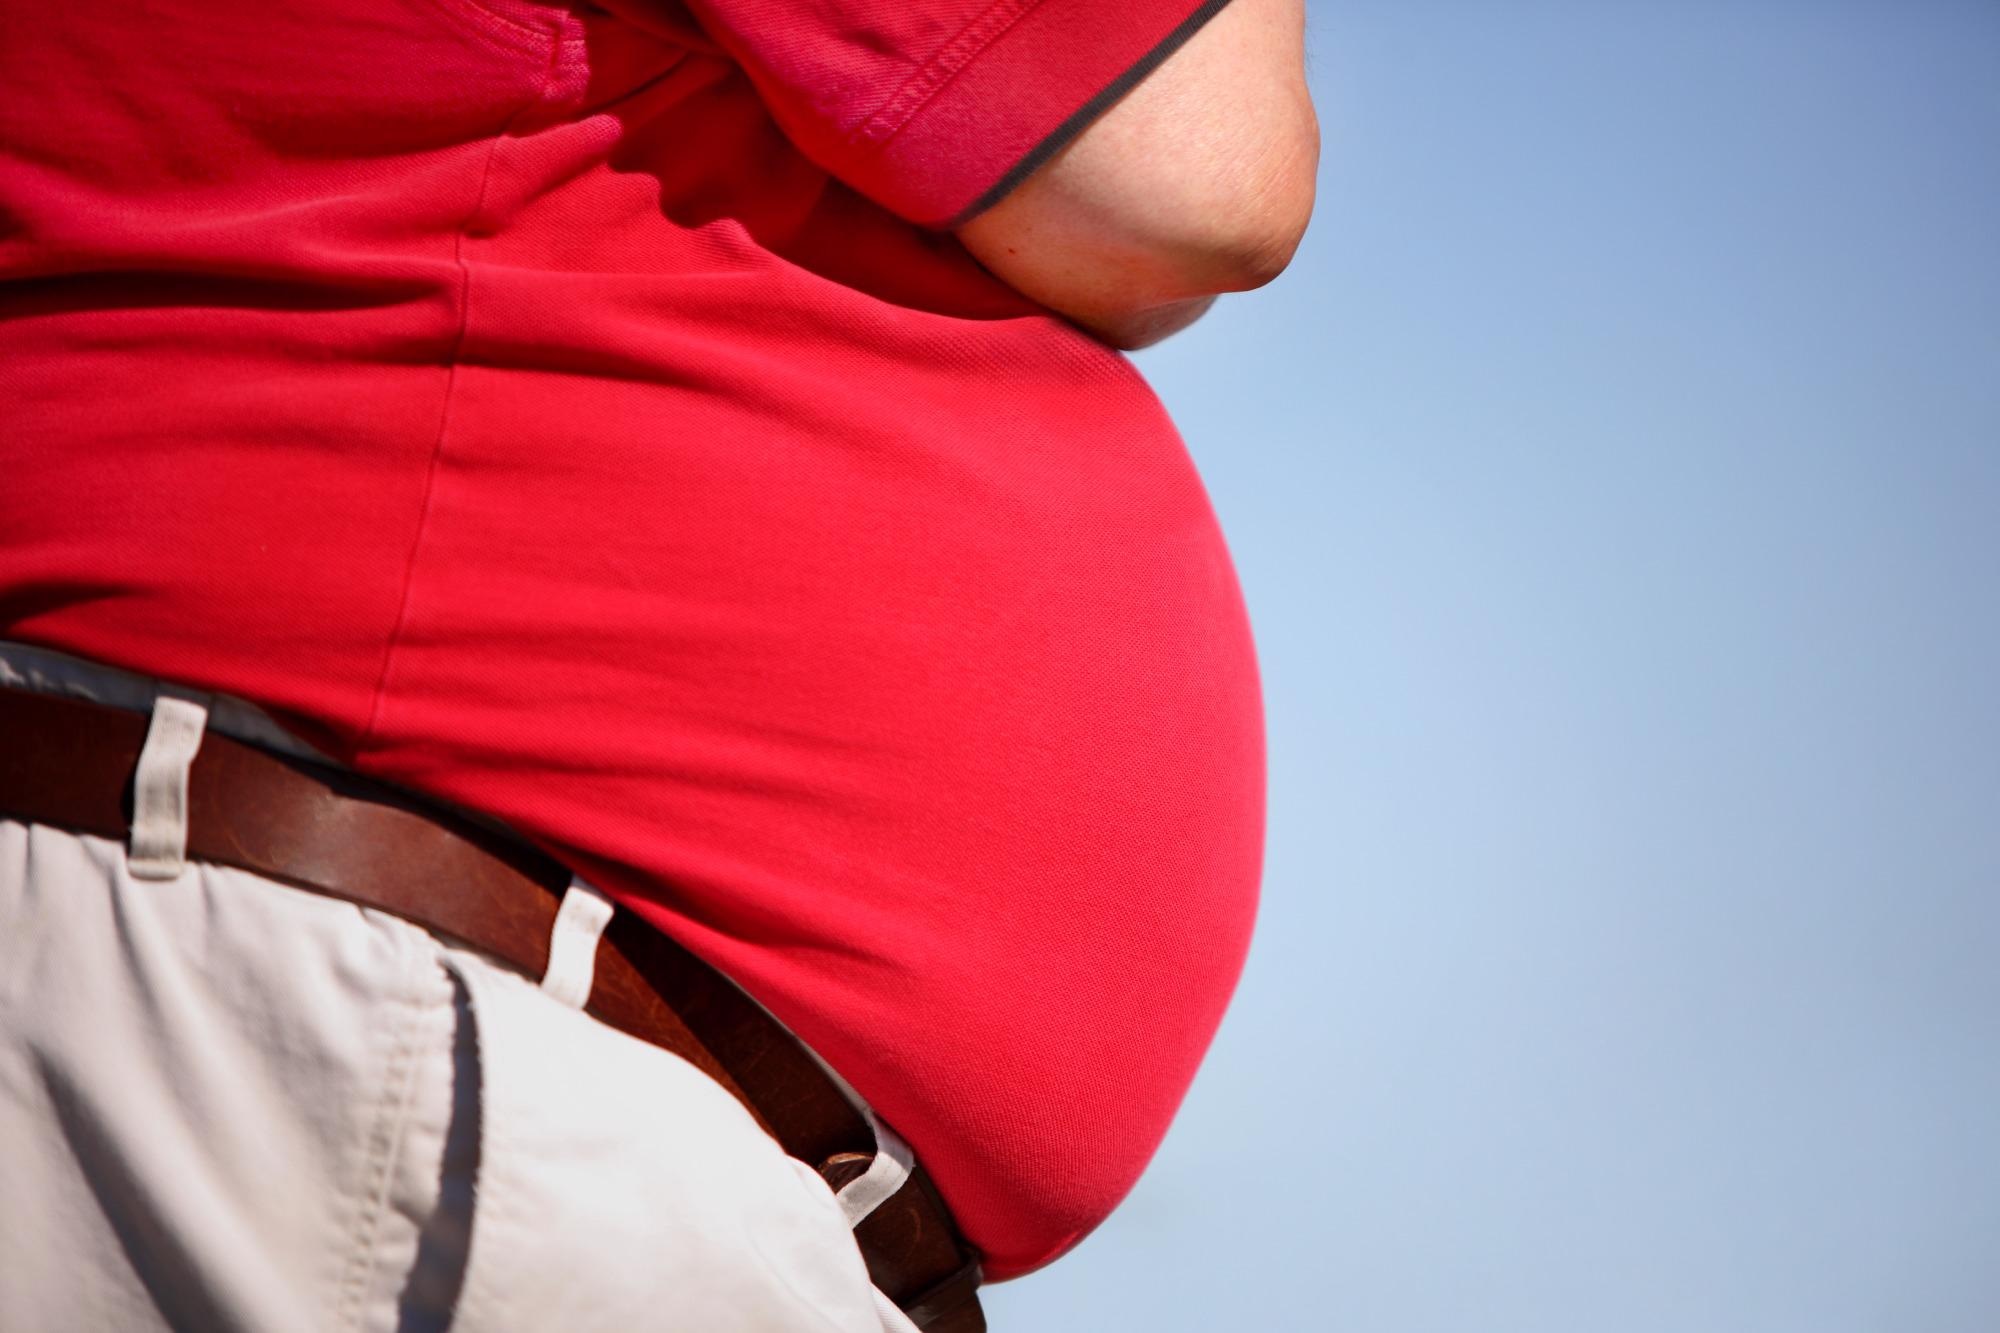 Study: Accelerated waning of the humoral response to SARS-CoV-2 vaccines in obesity. Image Credit: Suzanne Tucker / Shutterstock